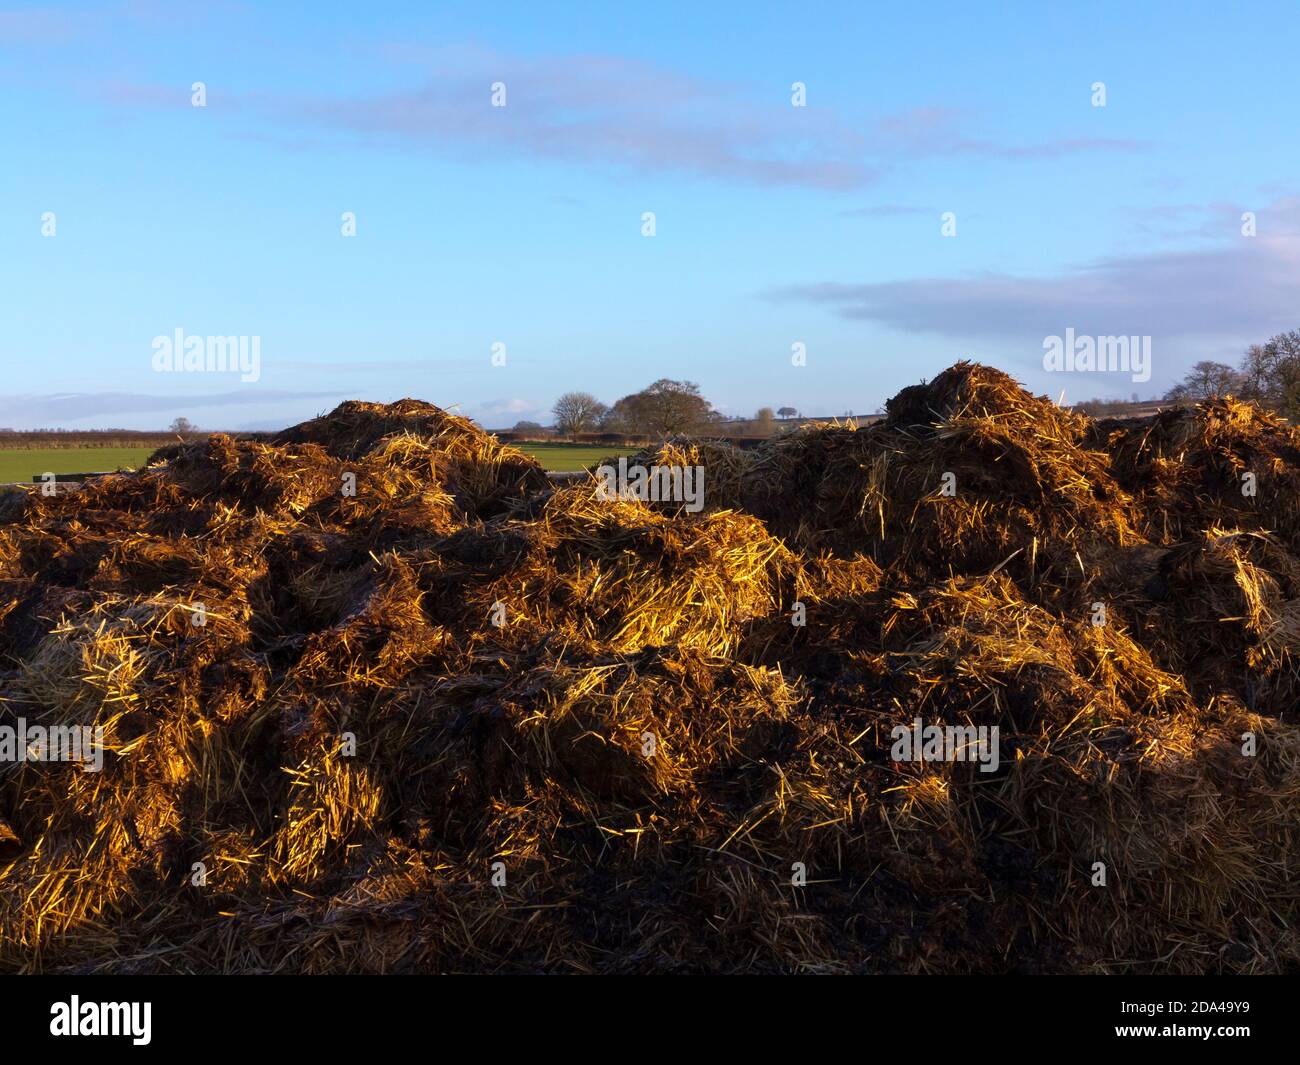 Pile of manure used as an organic fertilizer in agriculture in a field with blue sky behind. Stock Photo